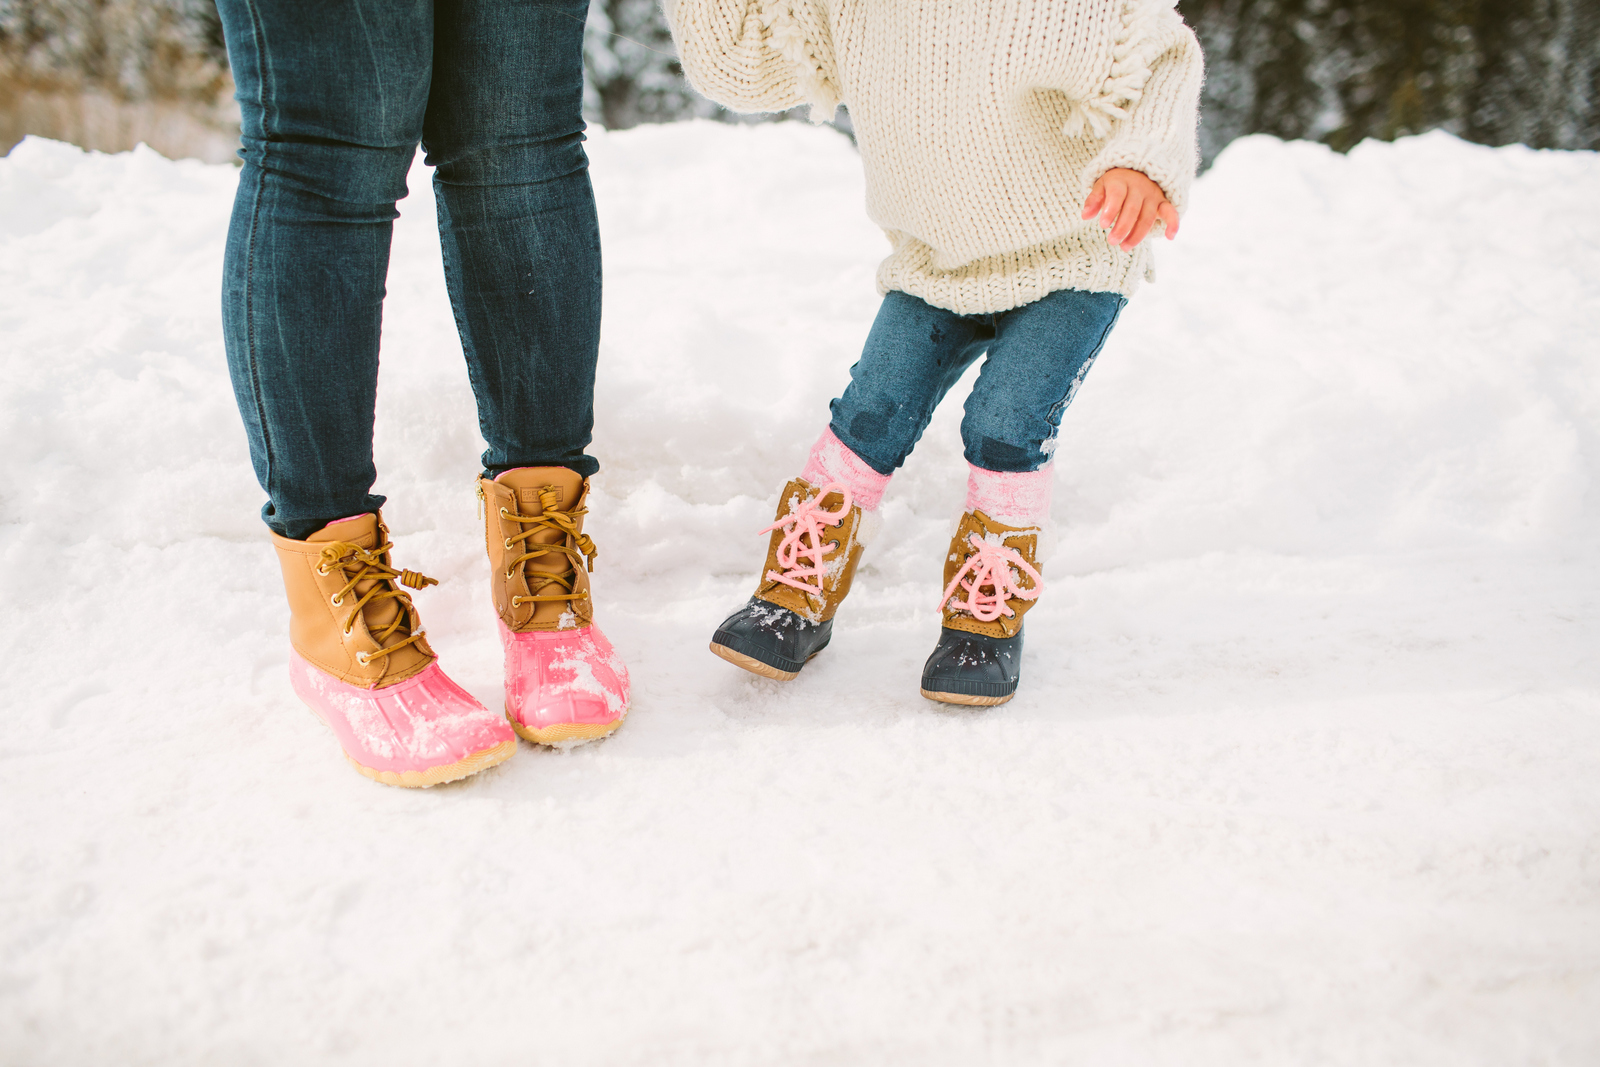 Stylish Snow Boots for the Family